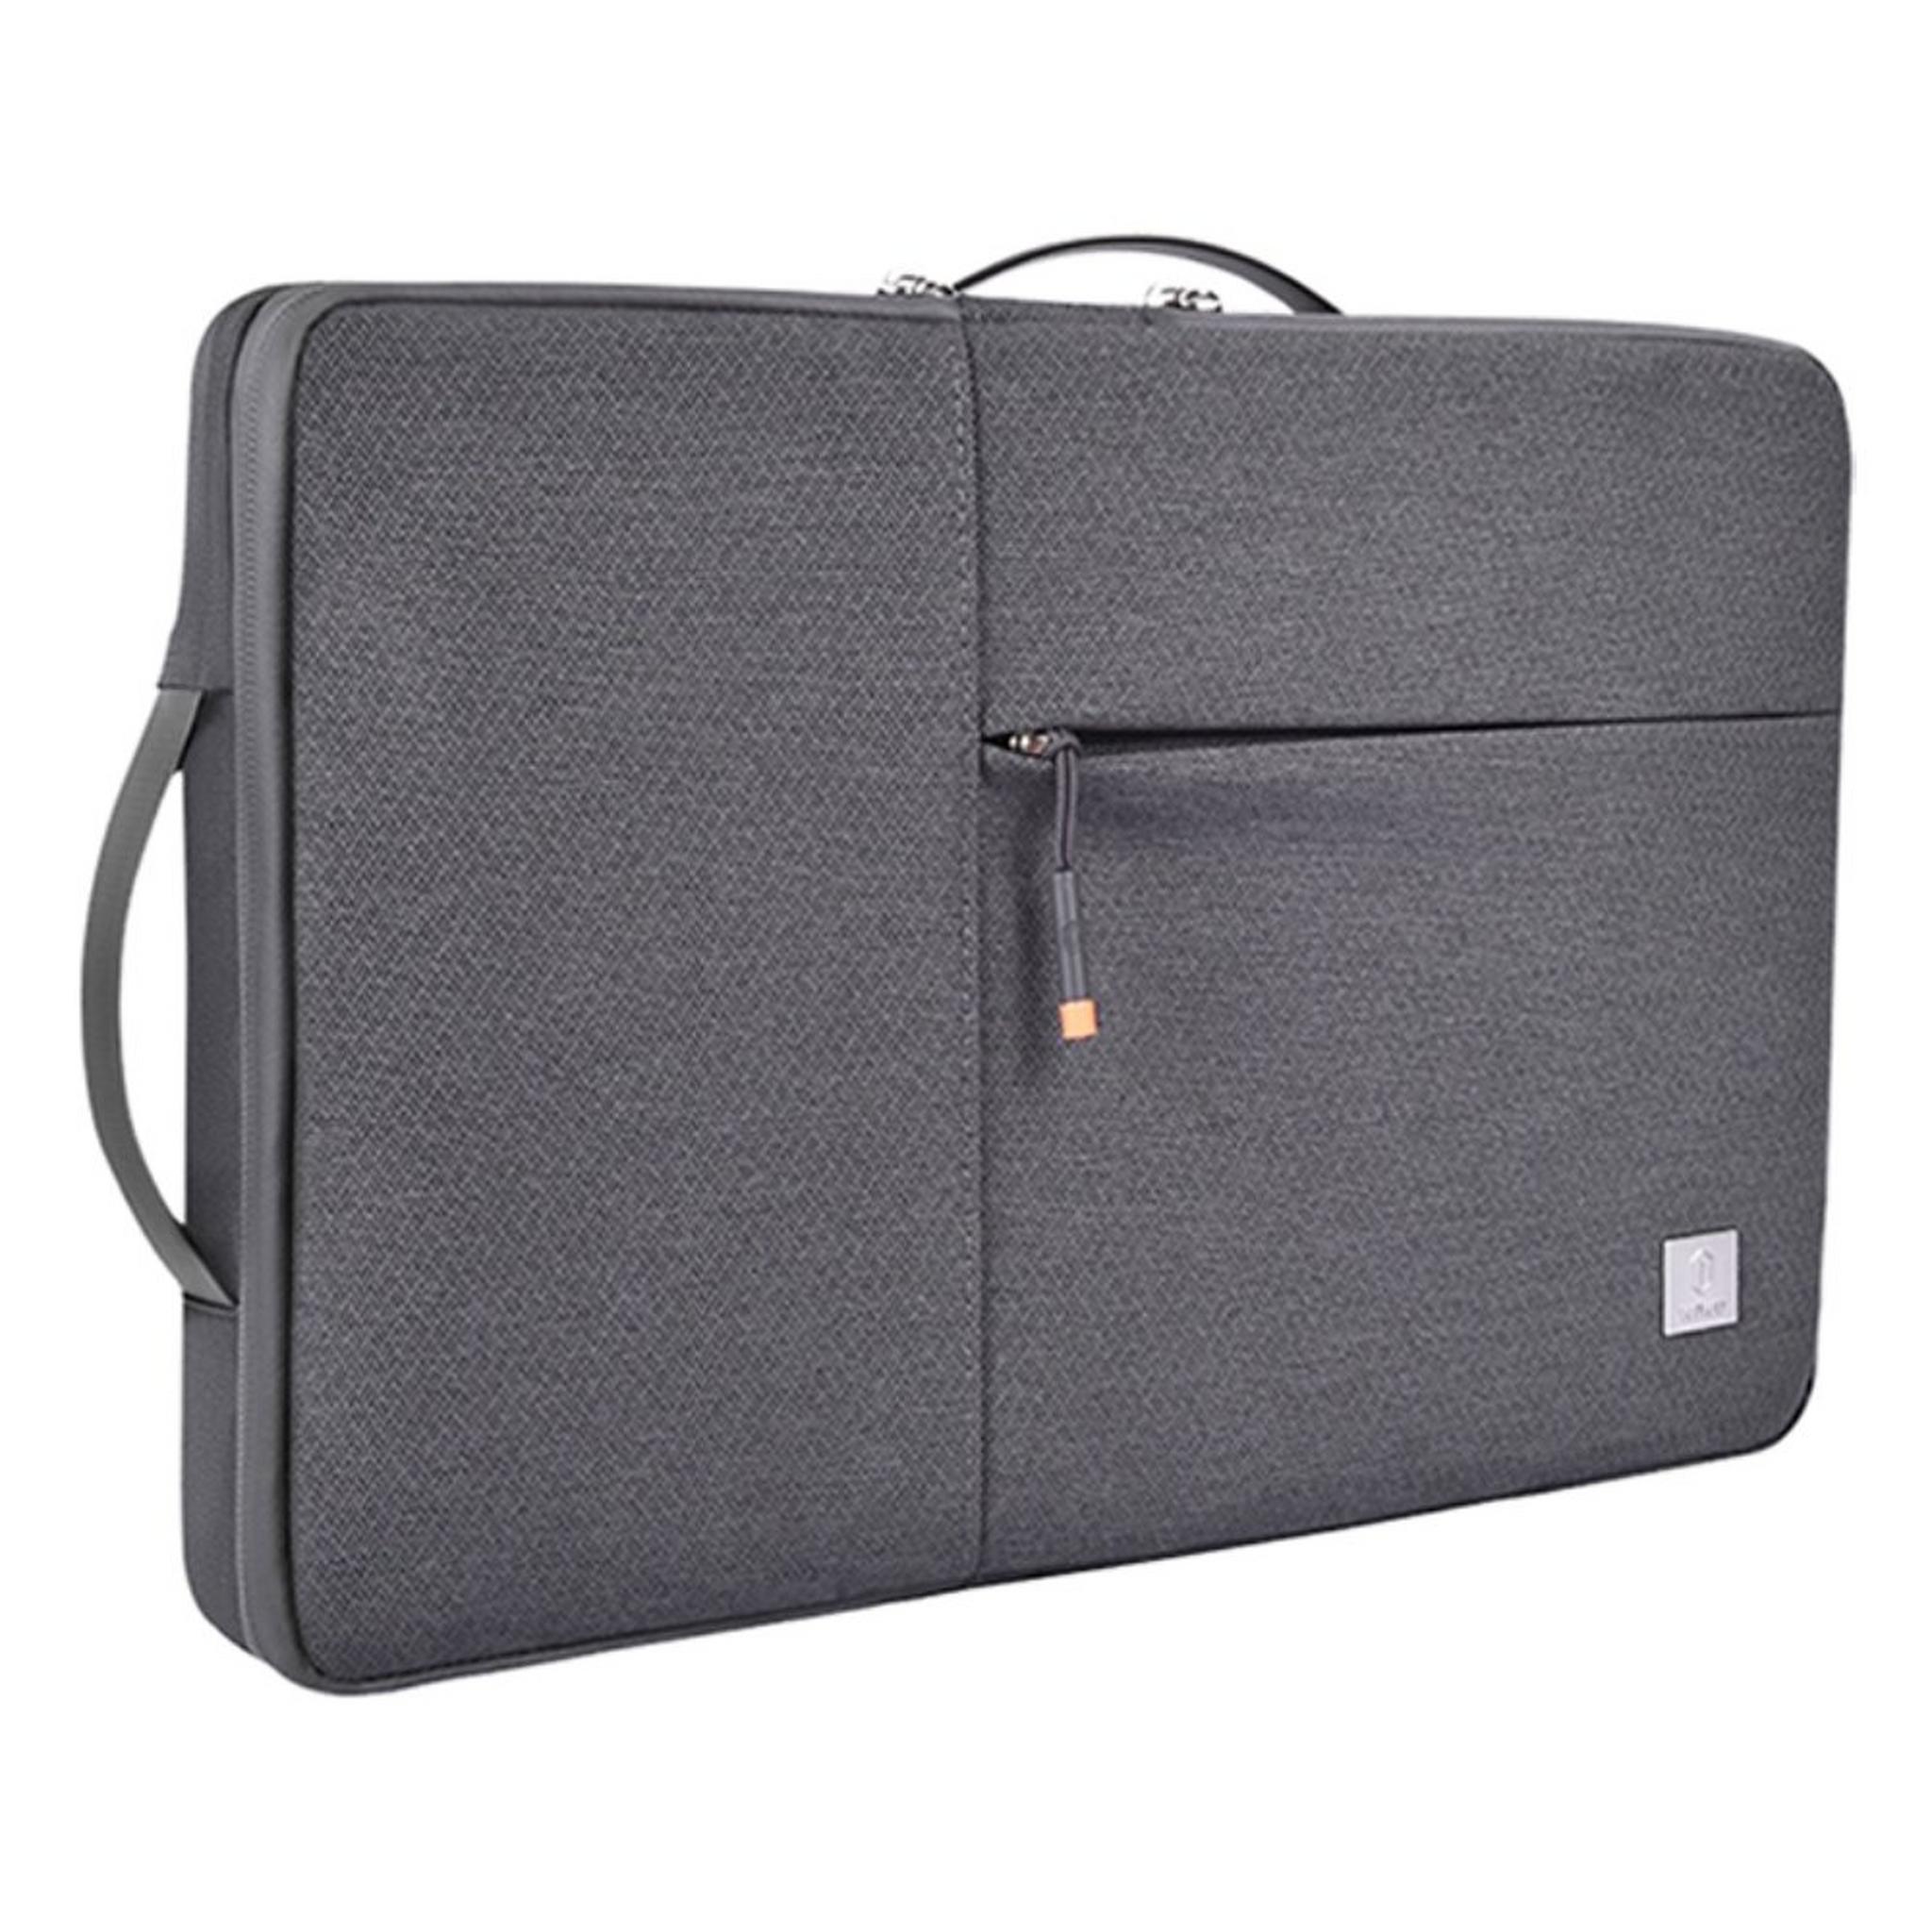 Wiwu Alpha Double Layer Sleeve Bag For 14-inch Laptop - Grey